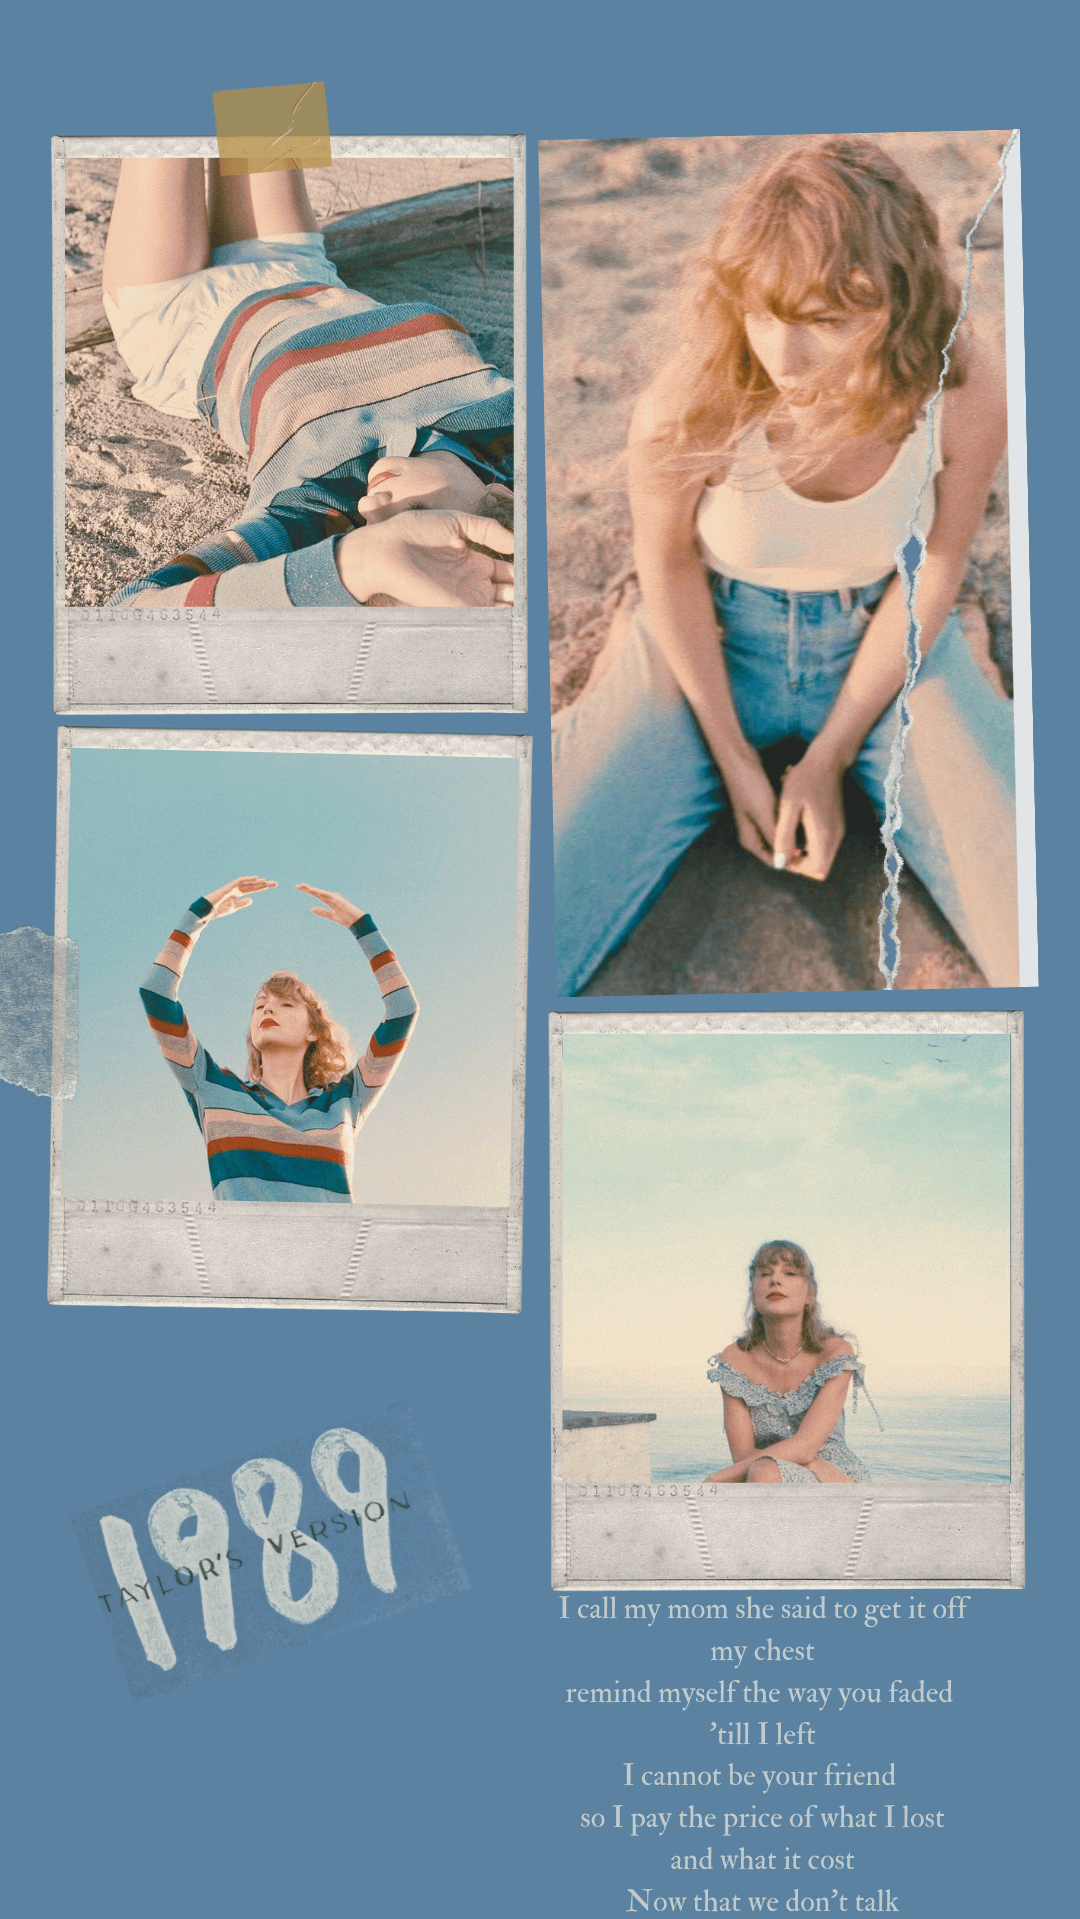  Taylors version wallpapers created by me rTaylorSwift